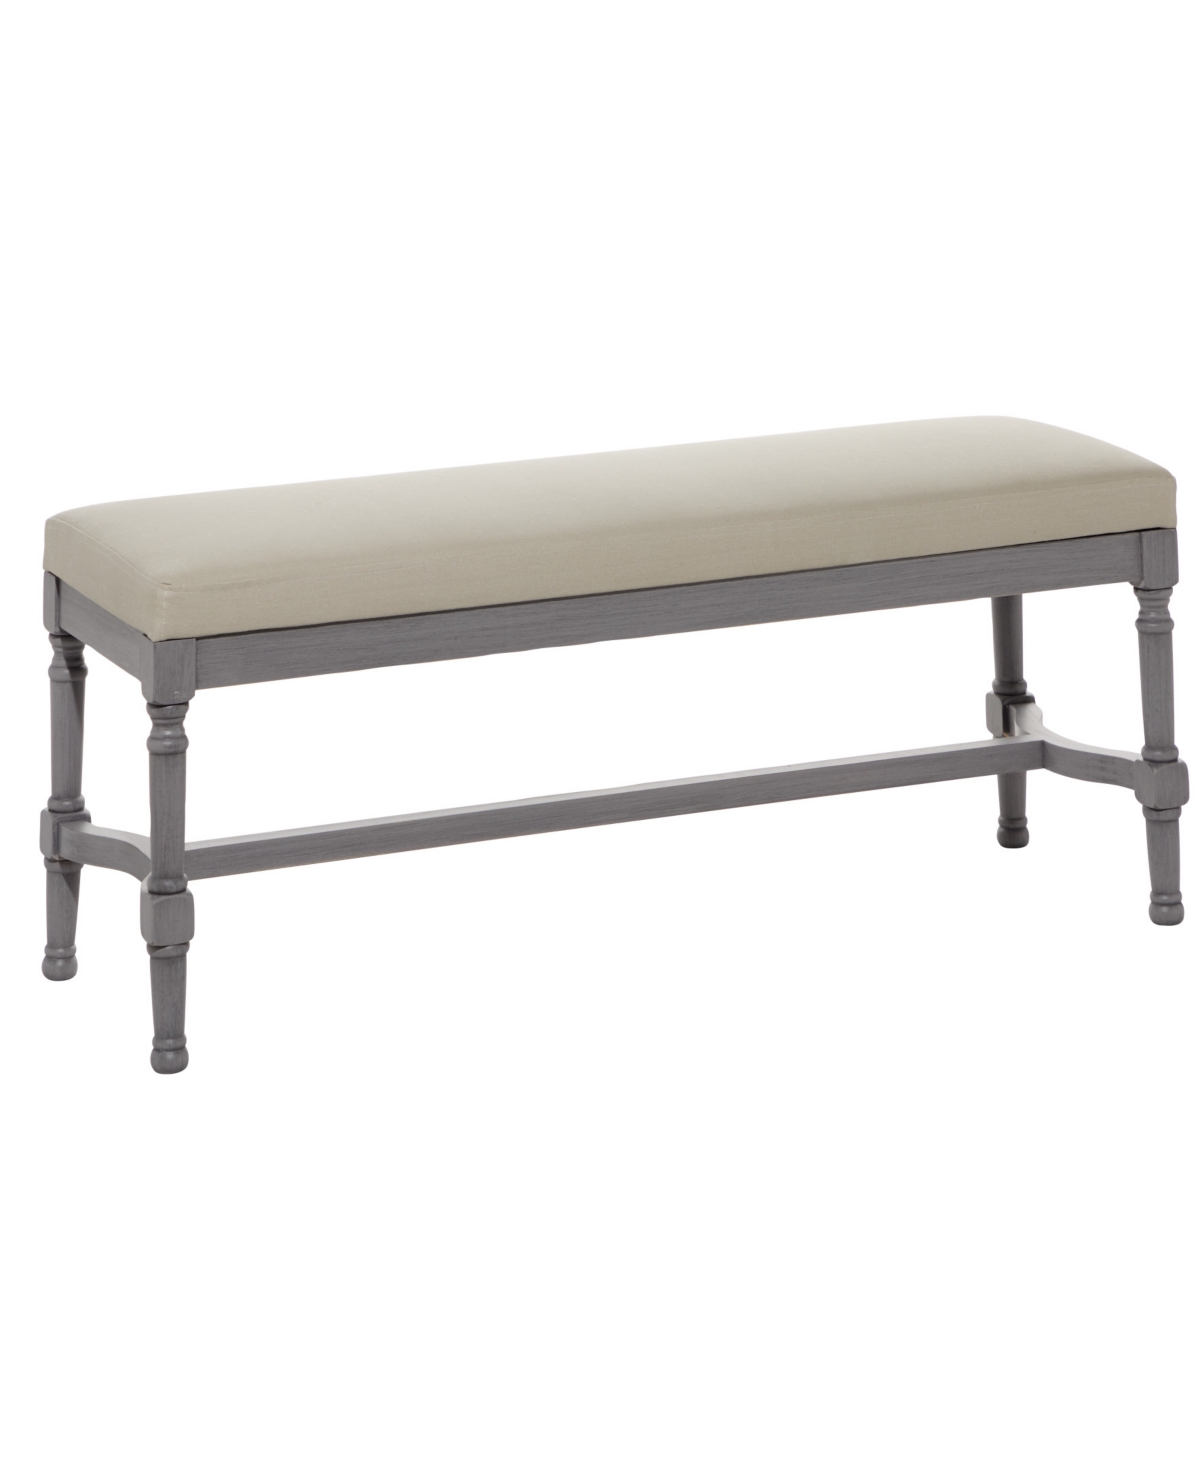 Rosemary Lane Wood And Linen Traditional Bench In Gray